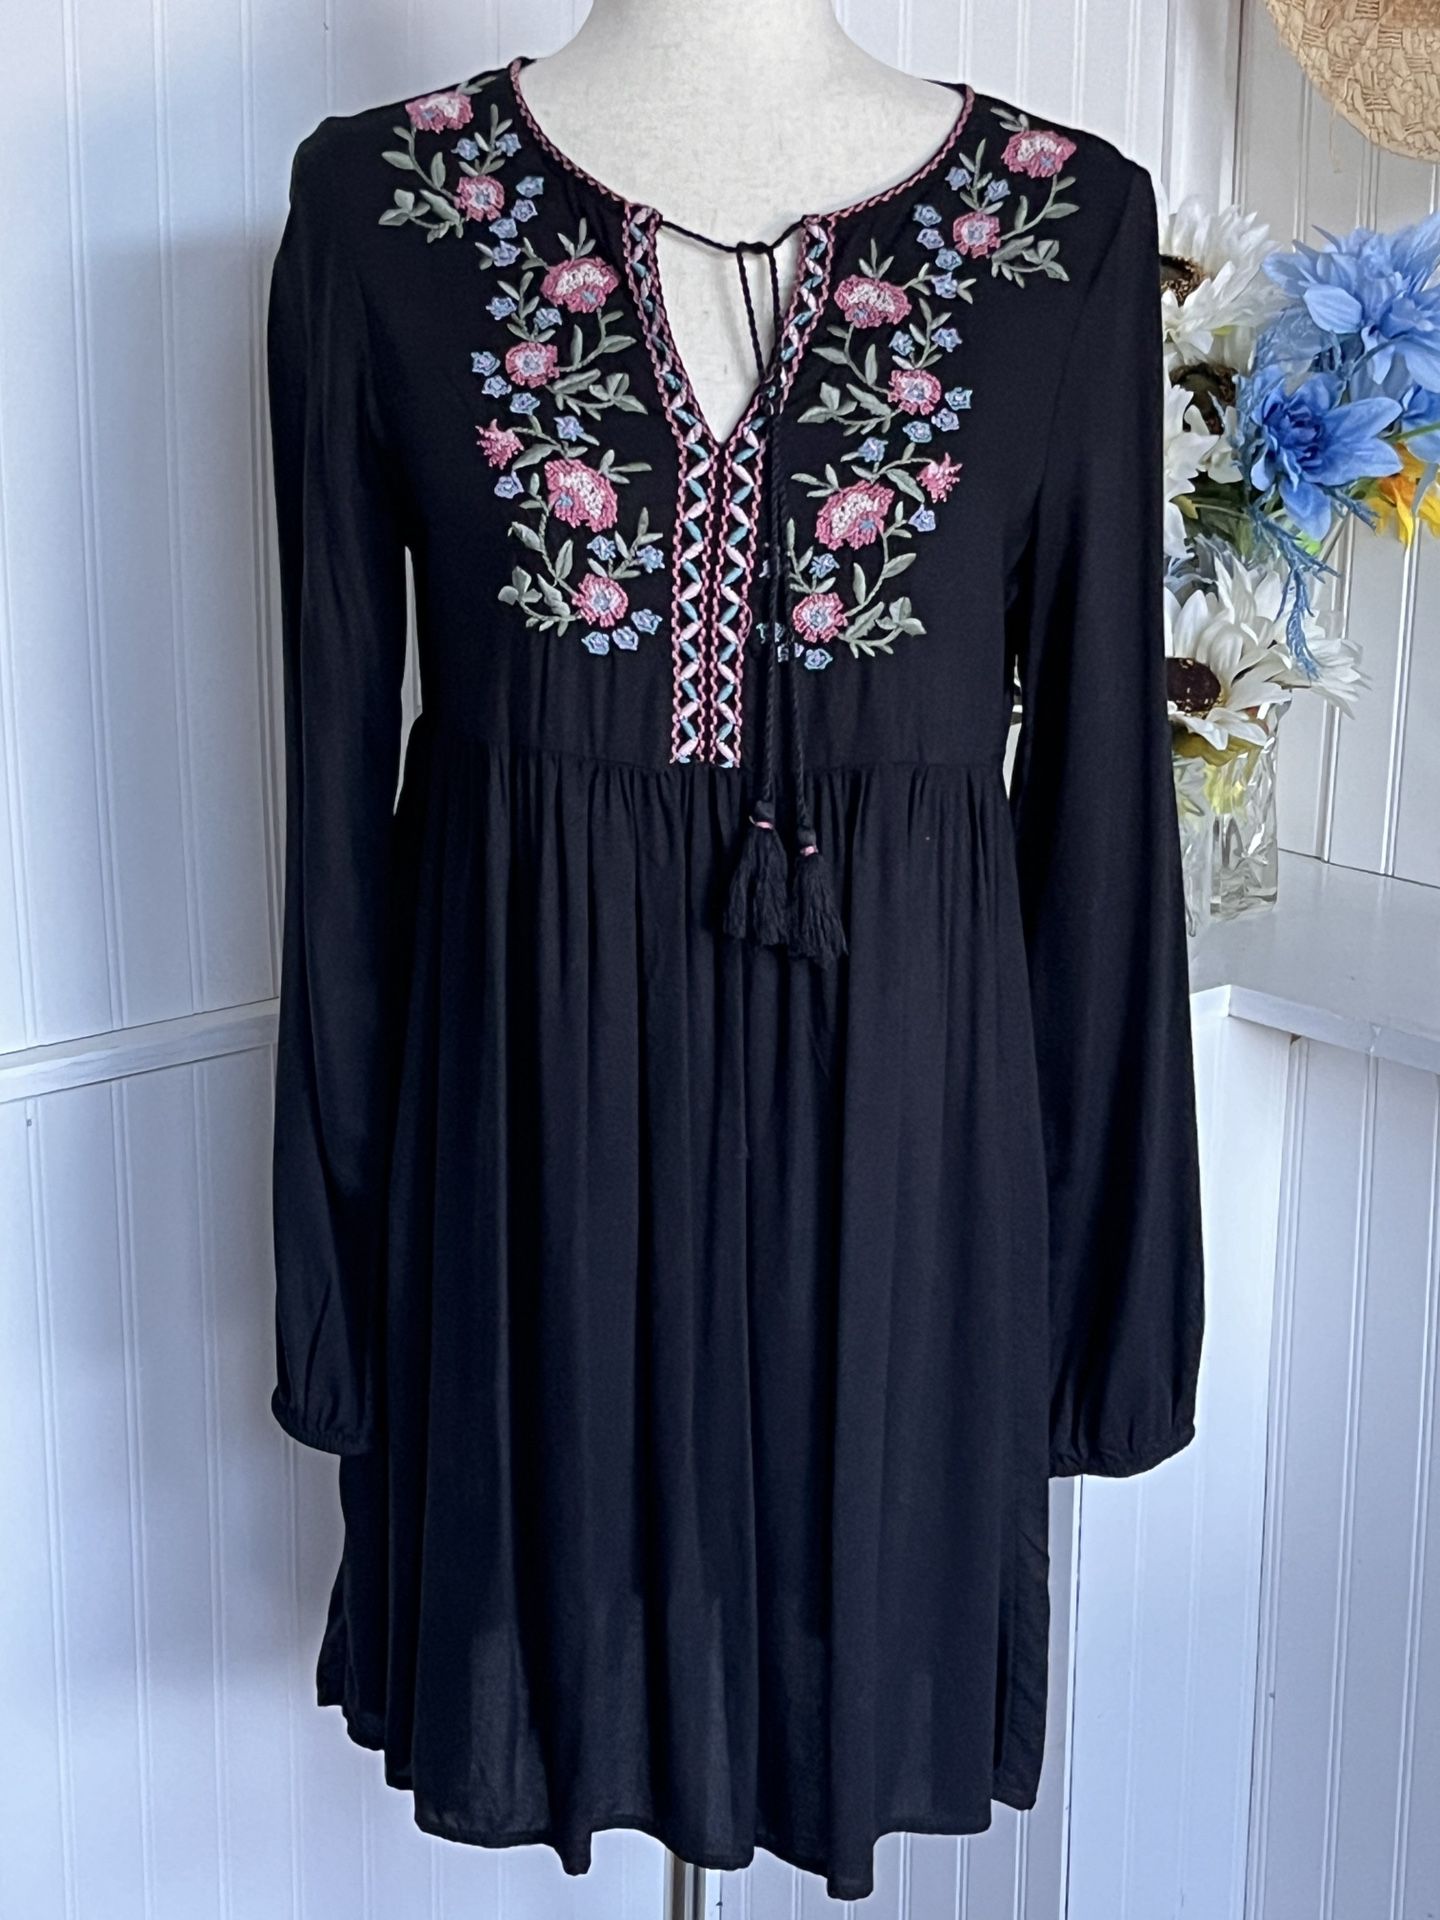 Arizona Blue Long-sleeved BohemianFloral Embroidered Dress 